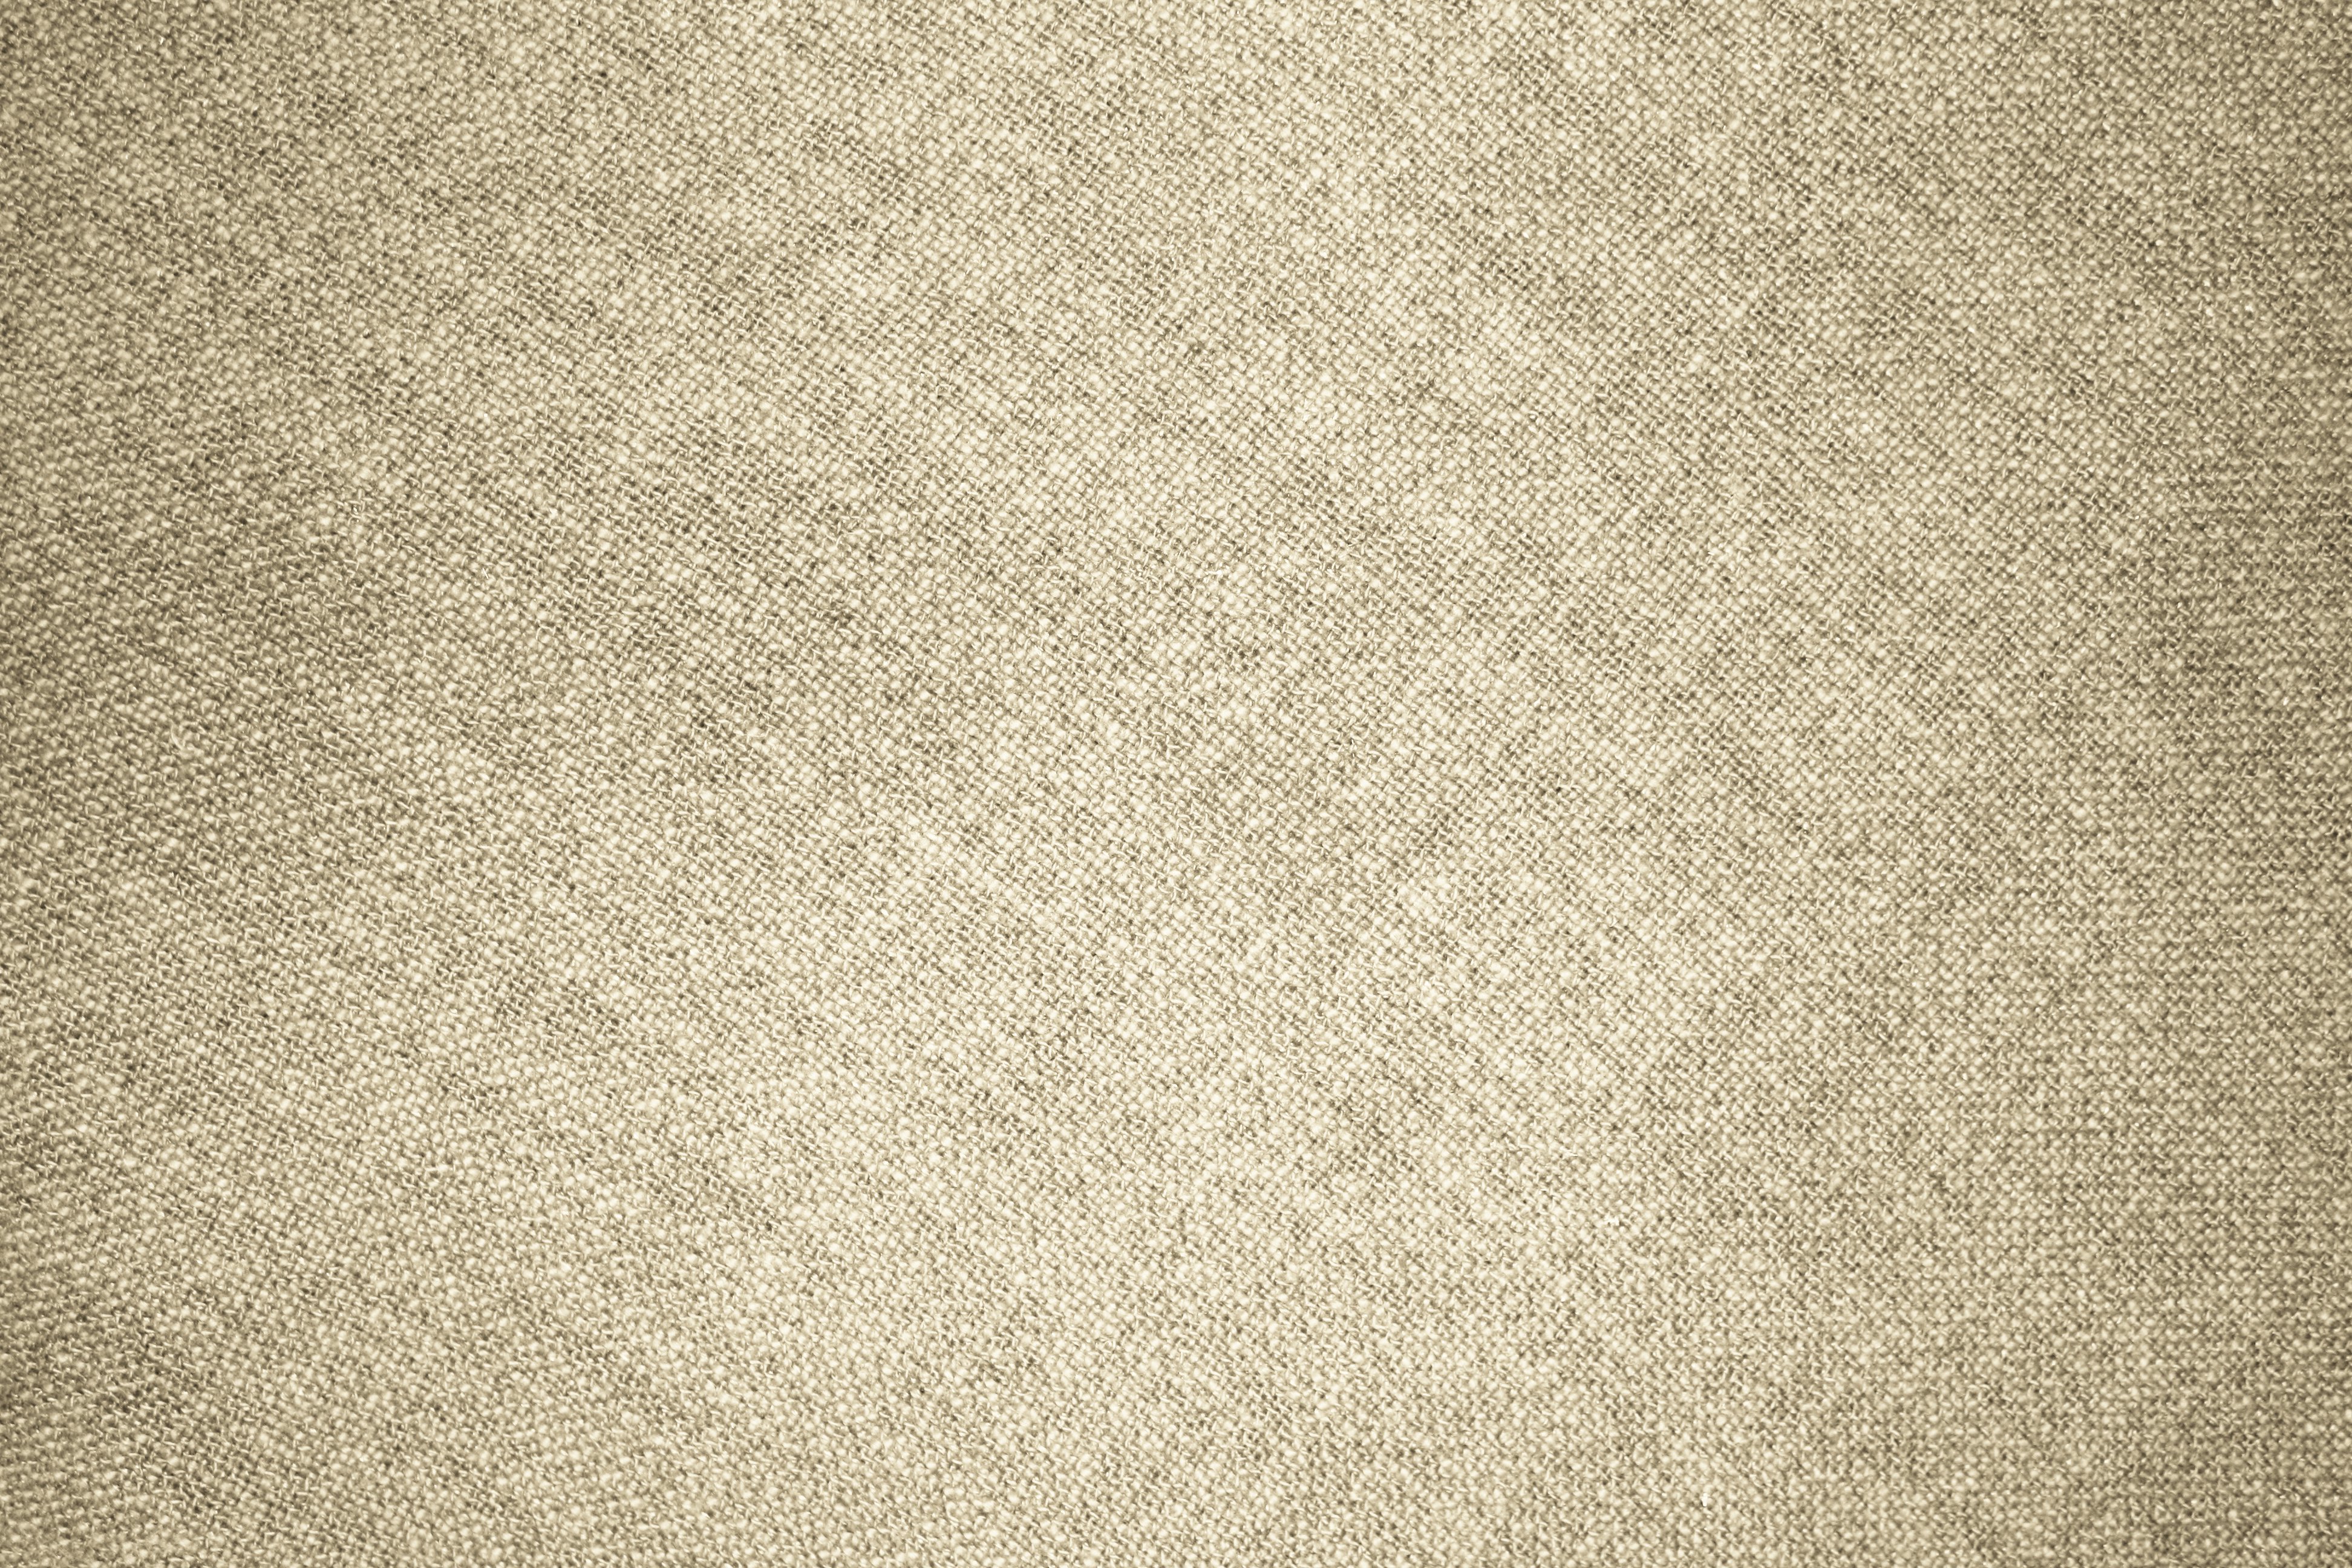 Beige Fabric Texture High Resolution Photo Dimensions